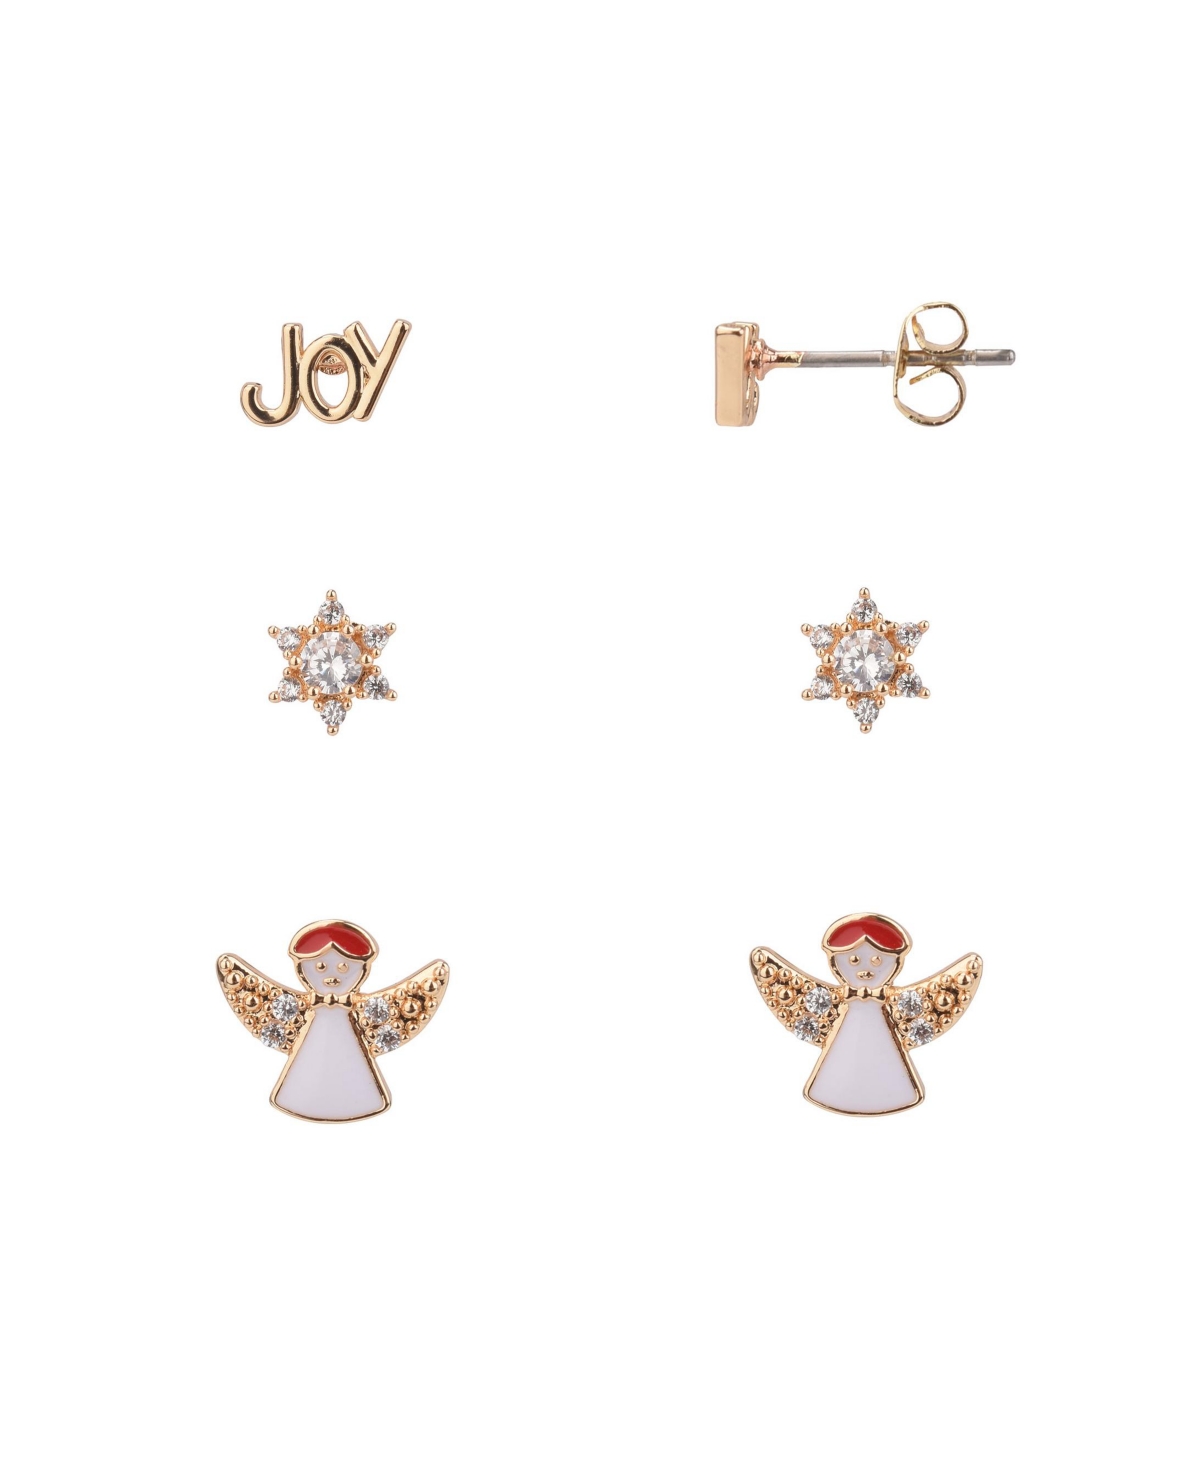 Fao Schwarz Star, Joy And Angel Trio Earring Set, 6 Pieces In Gold